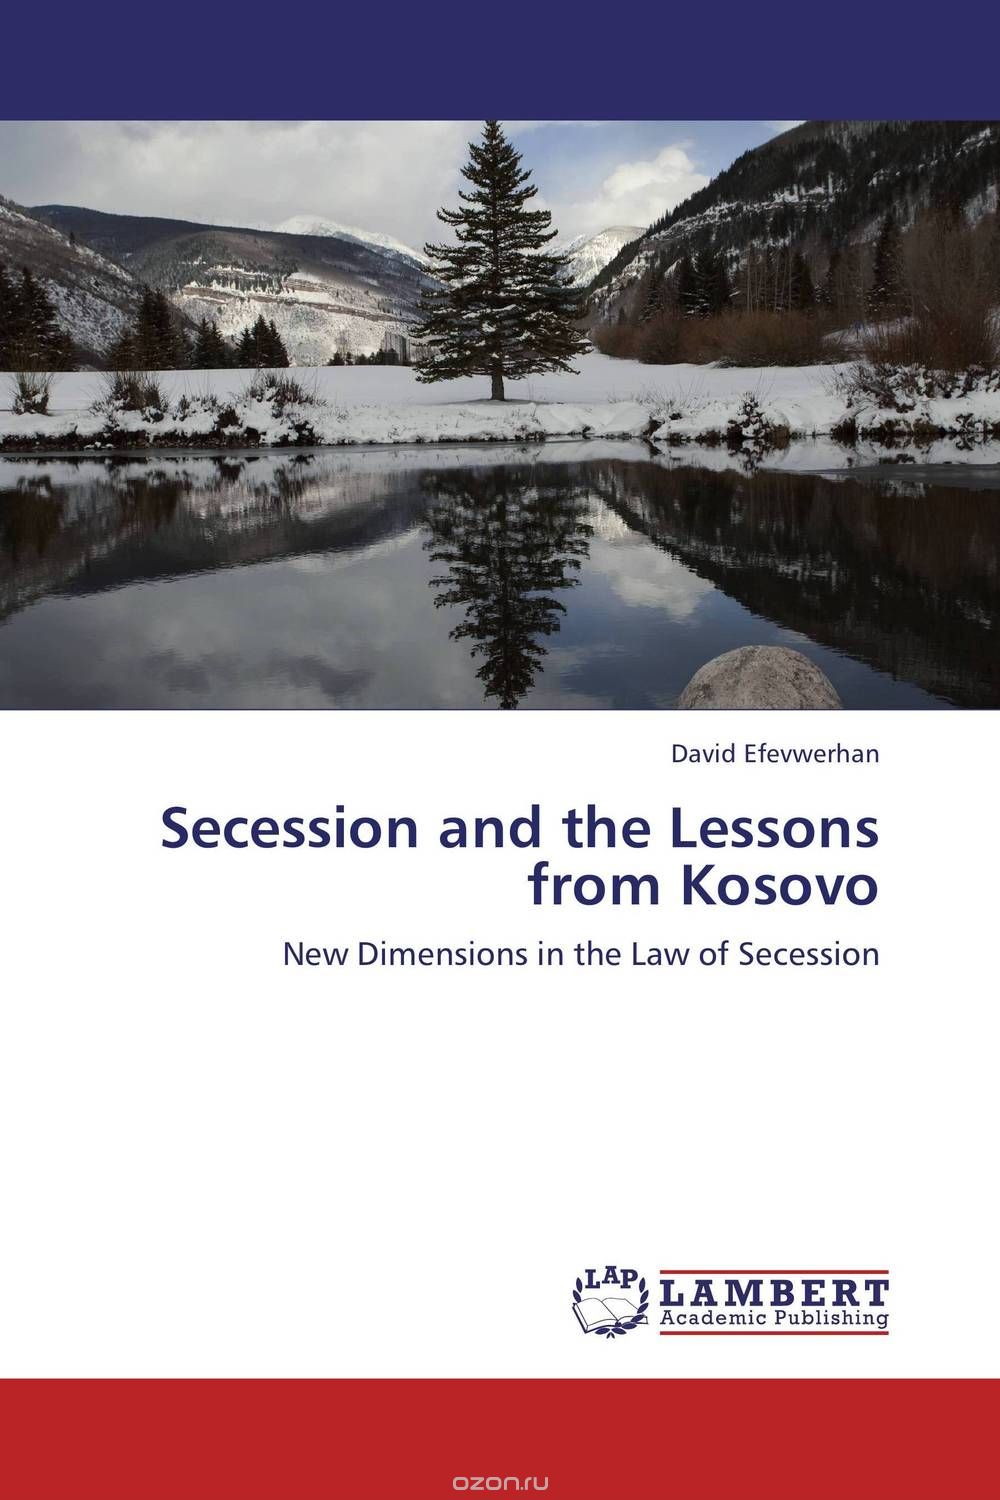 Скачать книгу "Secession and the Lessons from Kosovo"